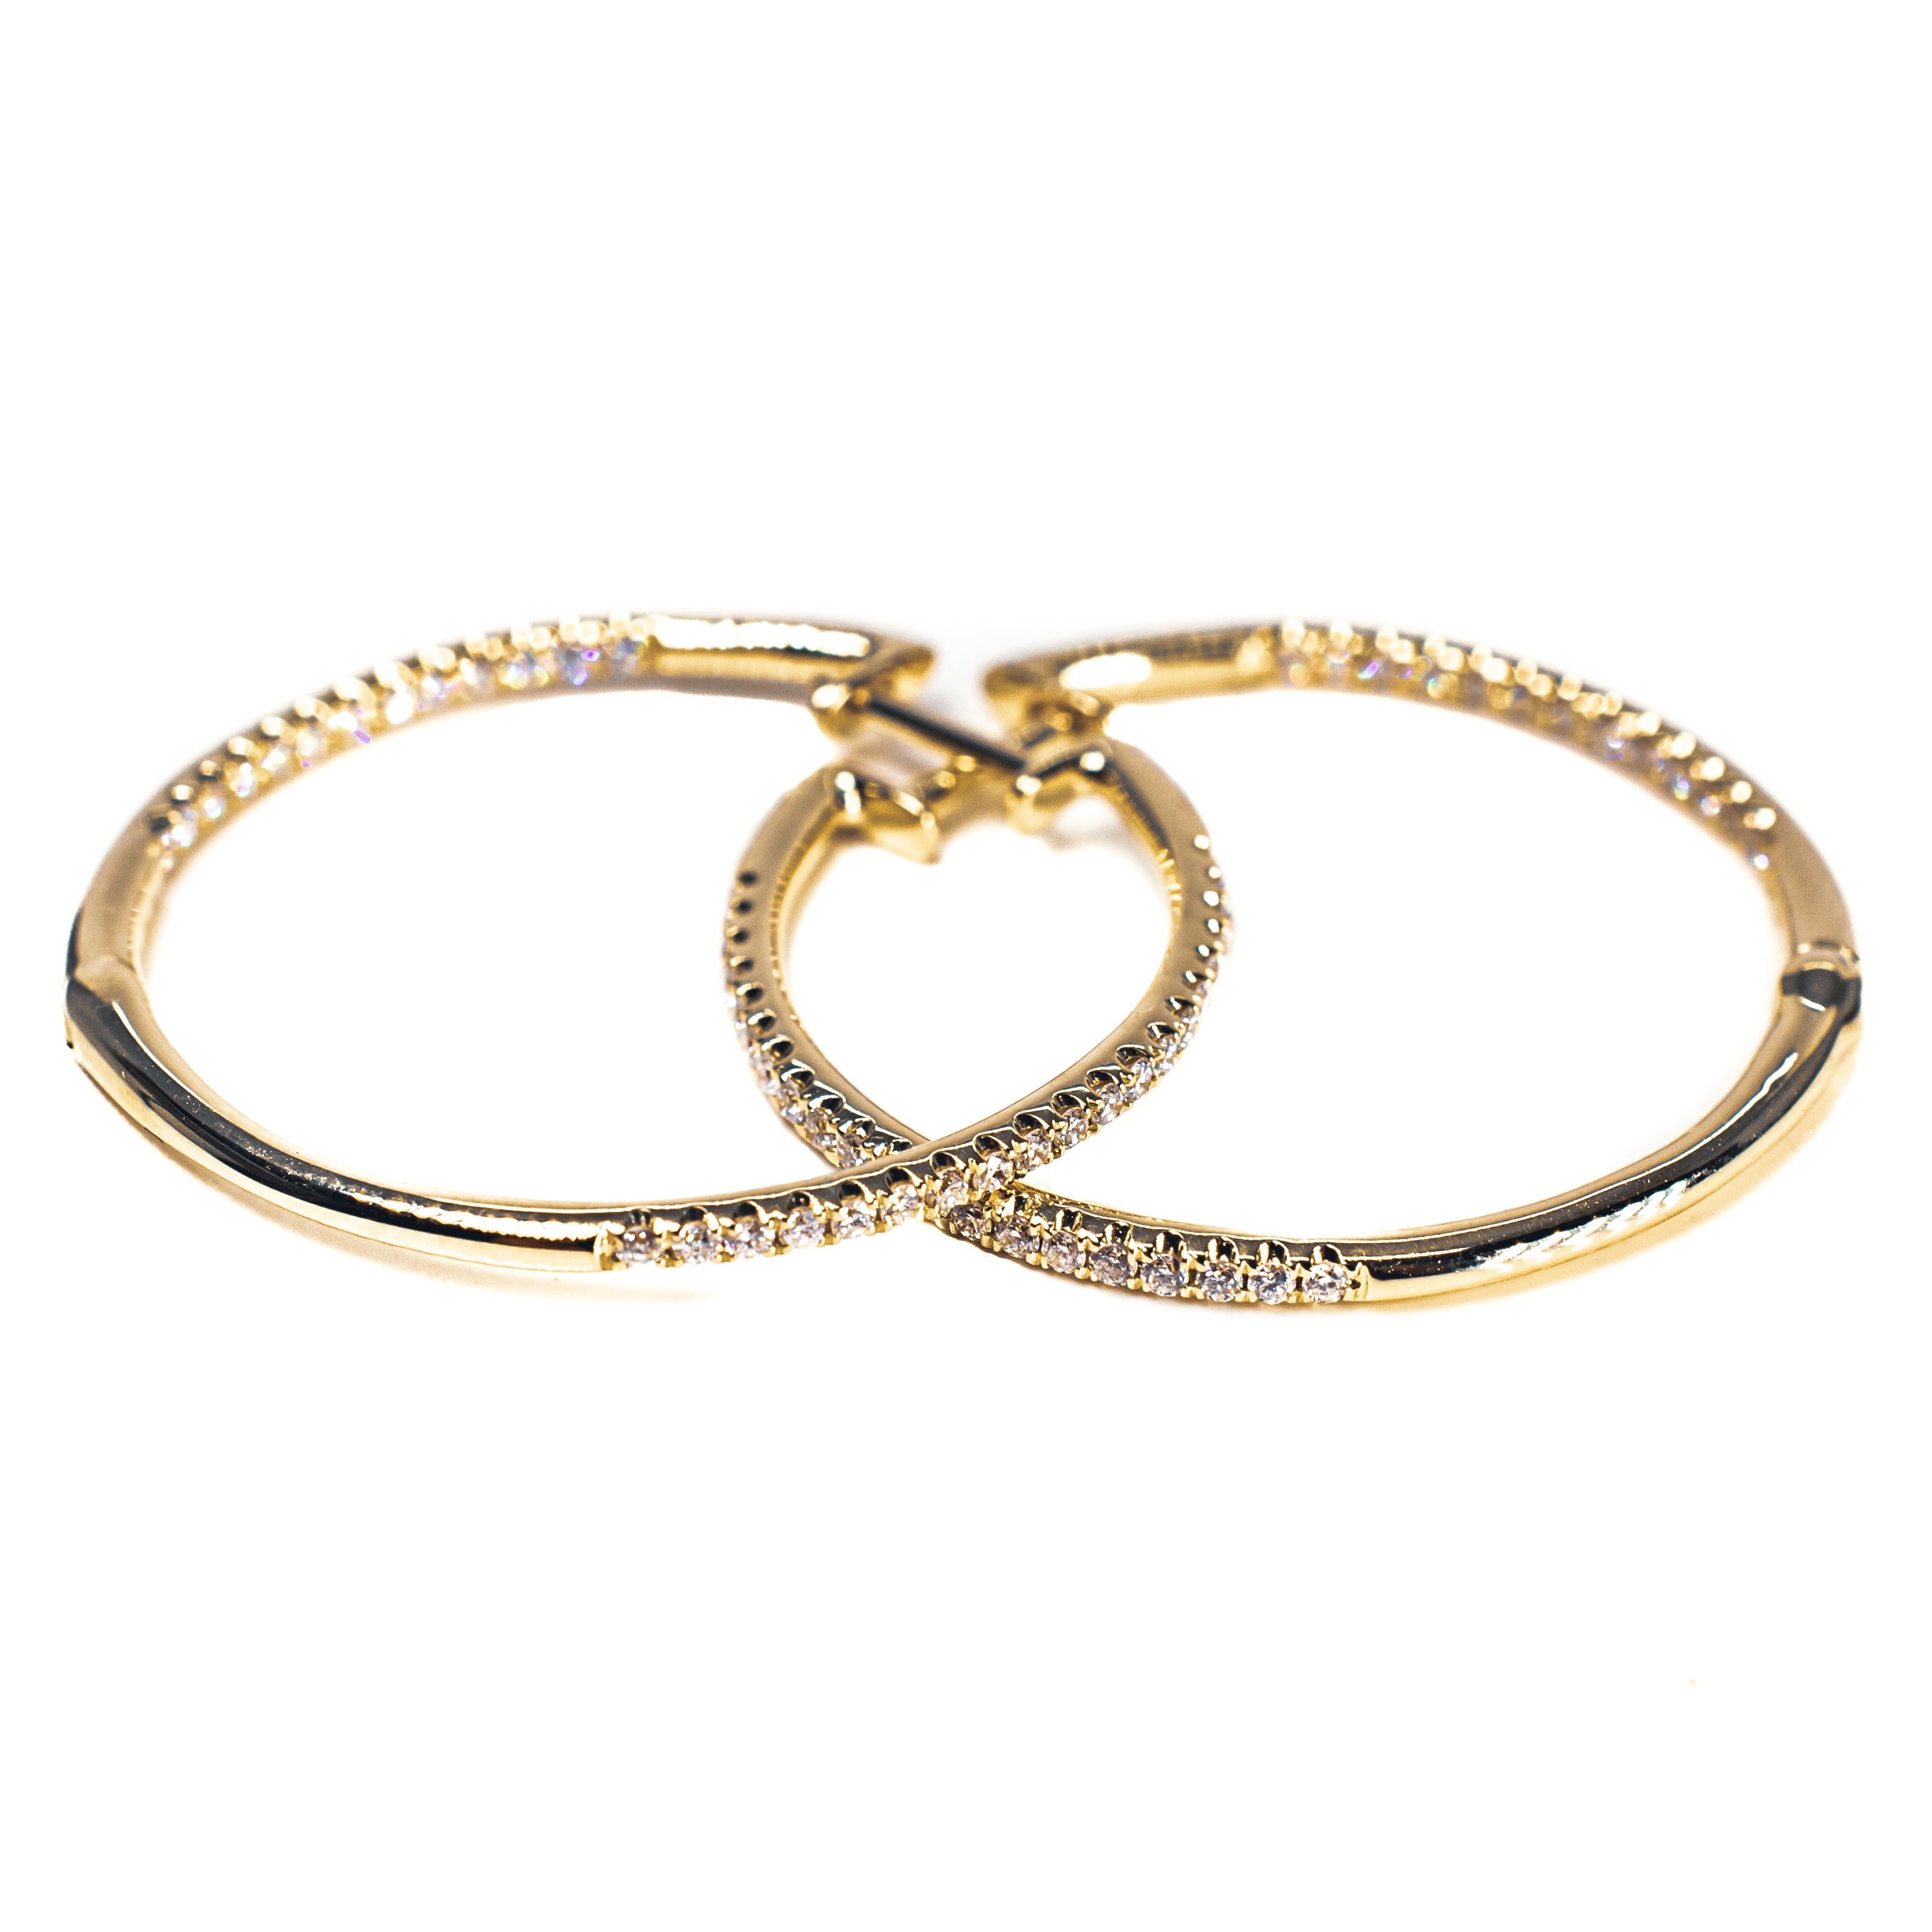 14kt Yellow Gold In and Out Style Thin Diamond Hoop Earrings